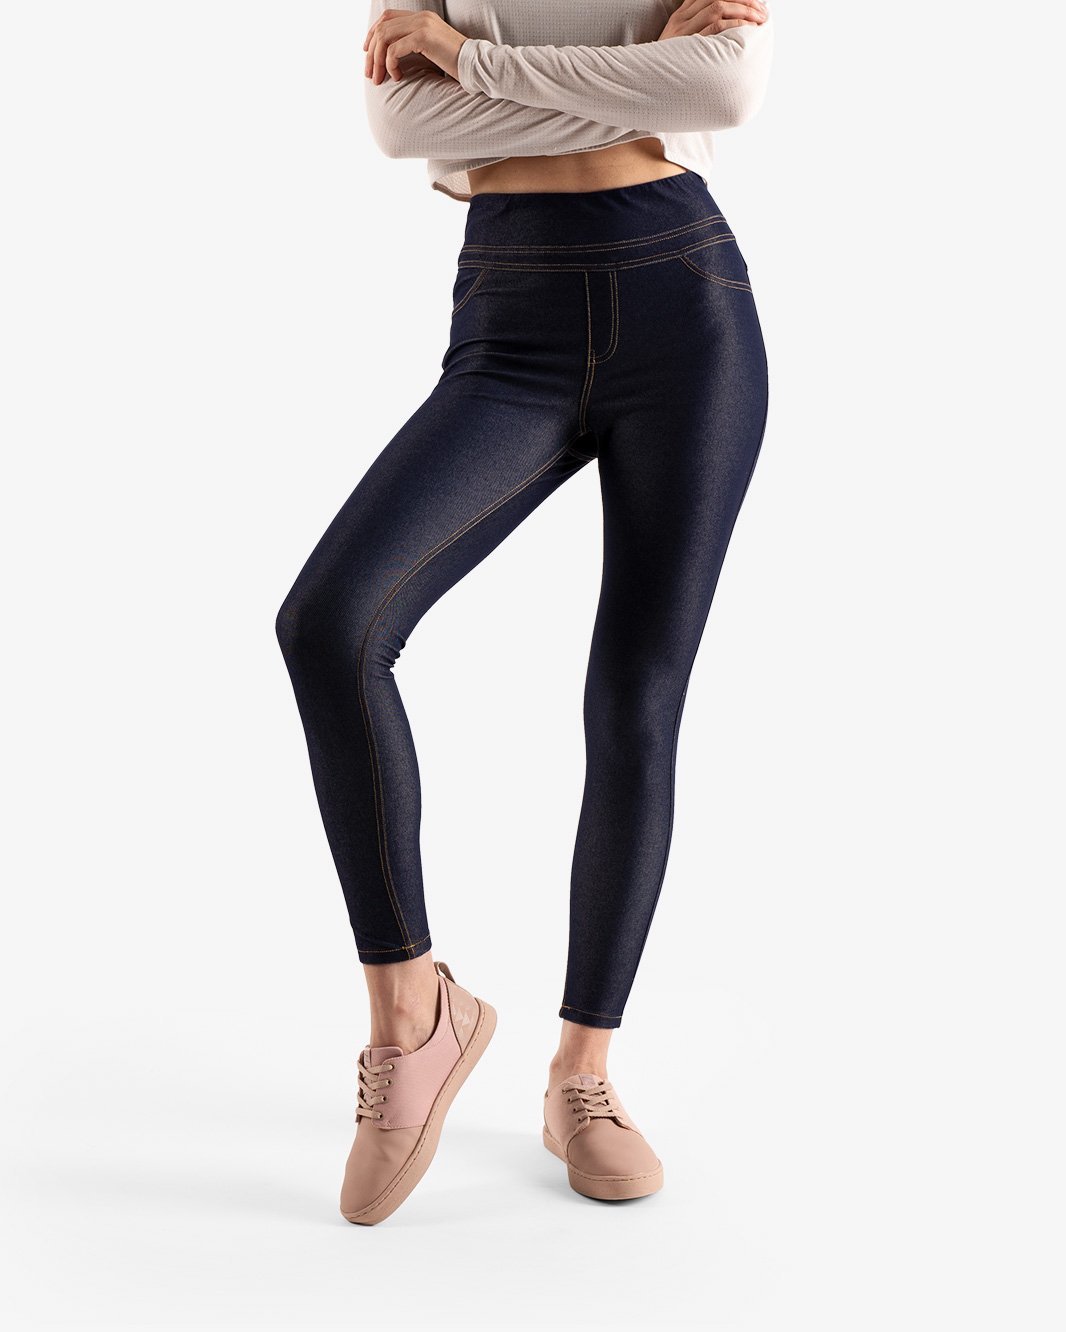 Leggings, Jeggings, Meggings—Say that Five Times Fast - Mission Local